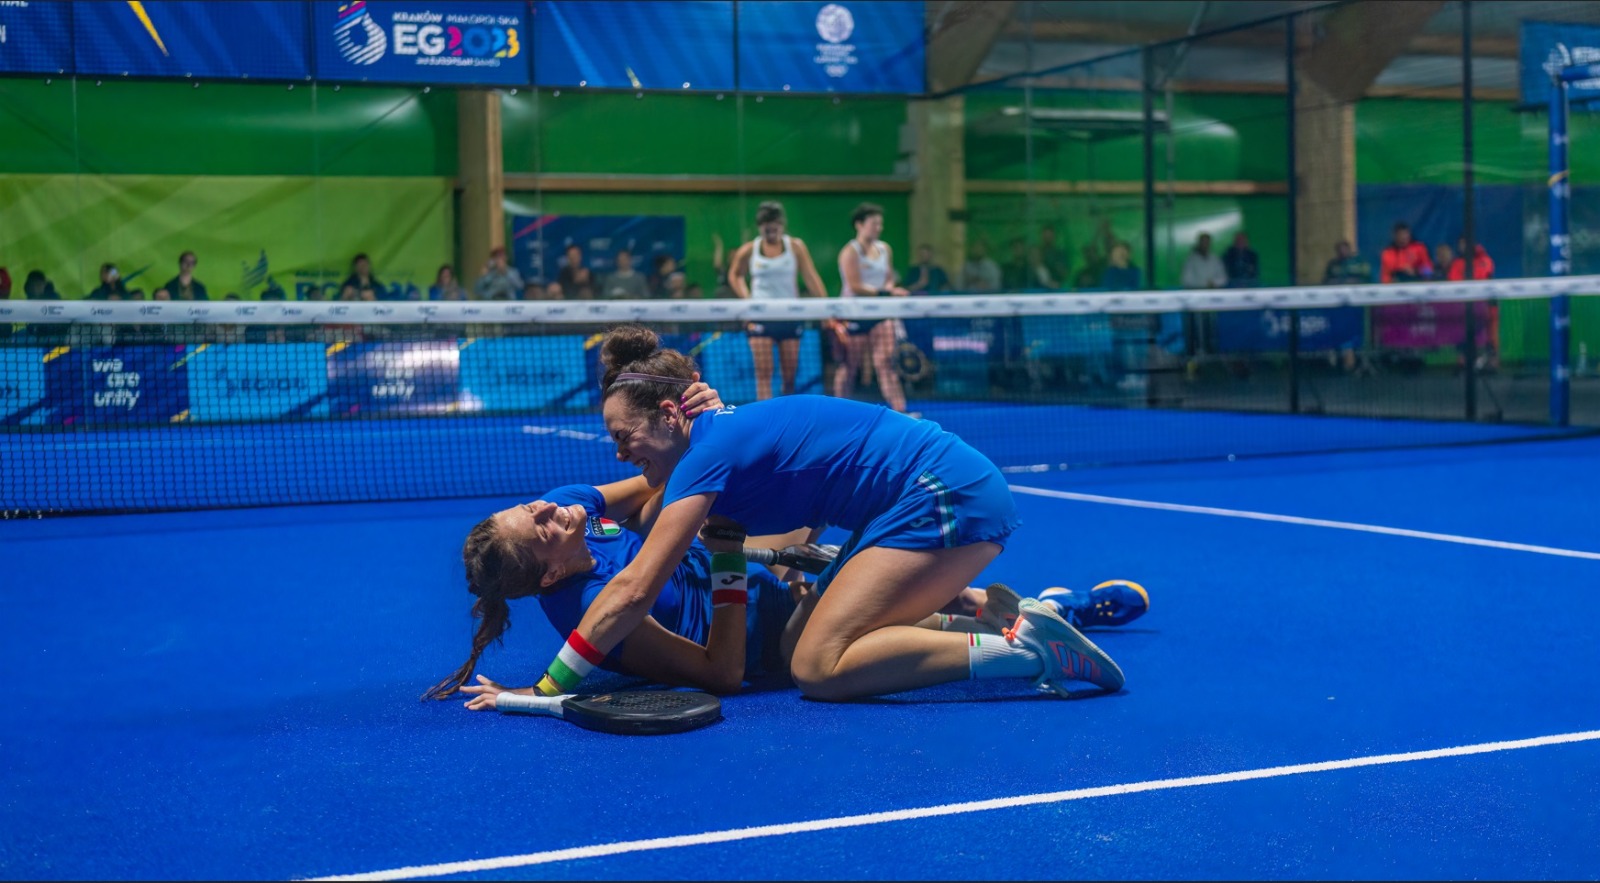 European Games – The double Spain vs Italy for the ladies!